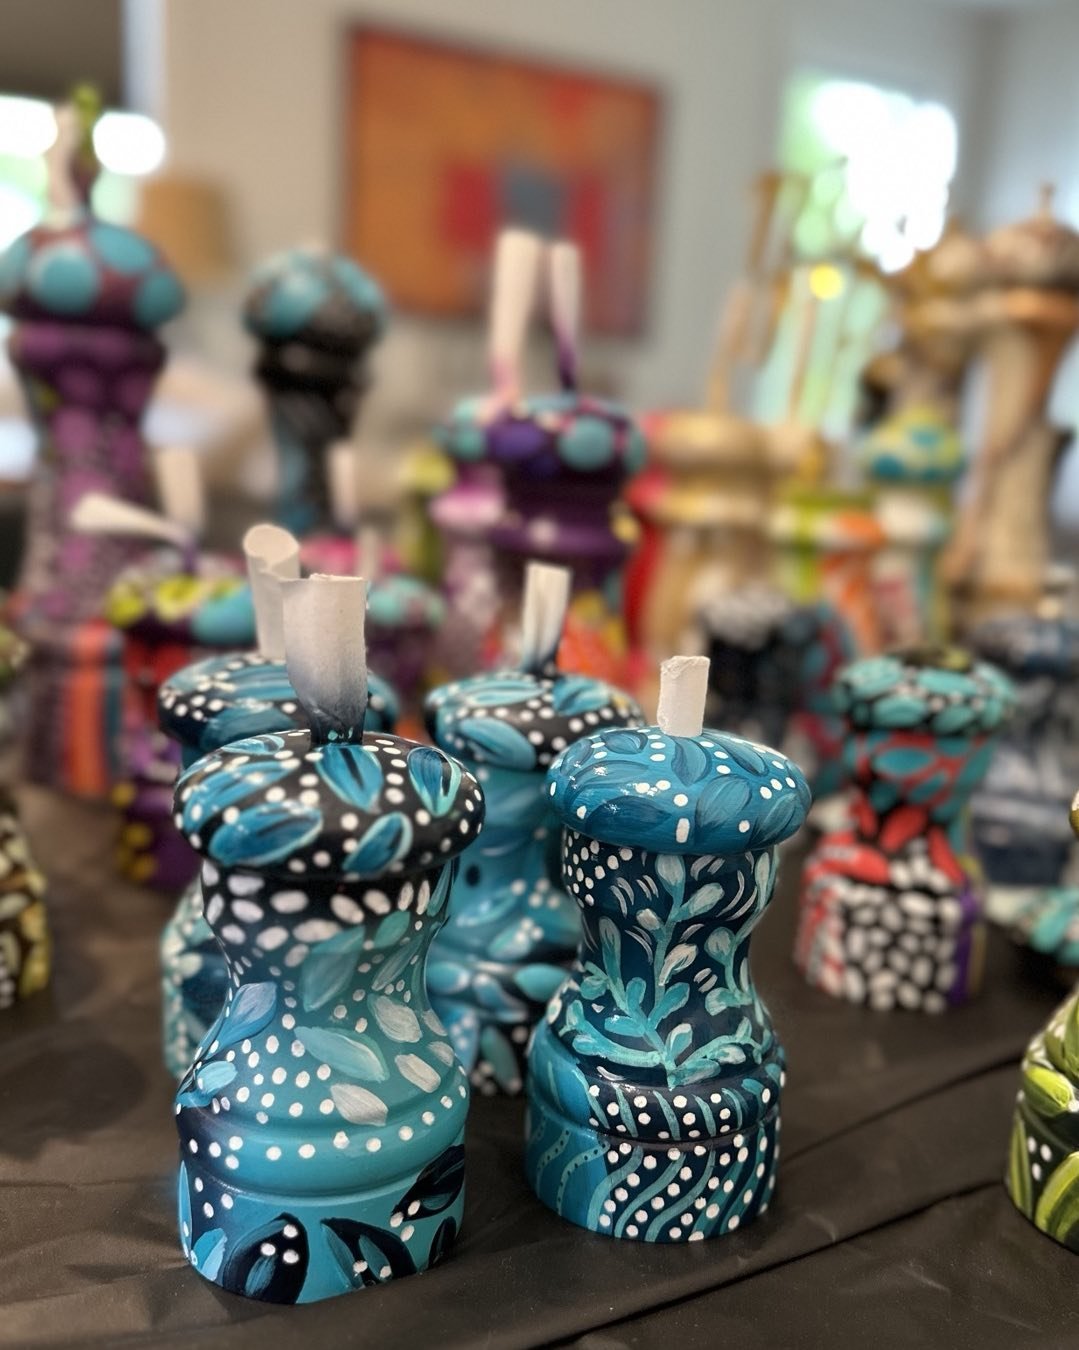 Final countdown to Cary Art Daze&hellip;trying to finish as many sets as I can today! Come check out my booth, the other amazing artists, food vendors, and music stages tomorrow 9am-5pm. #carync @caryartdaze #springartwork